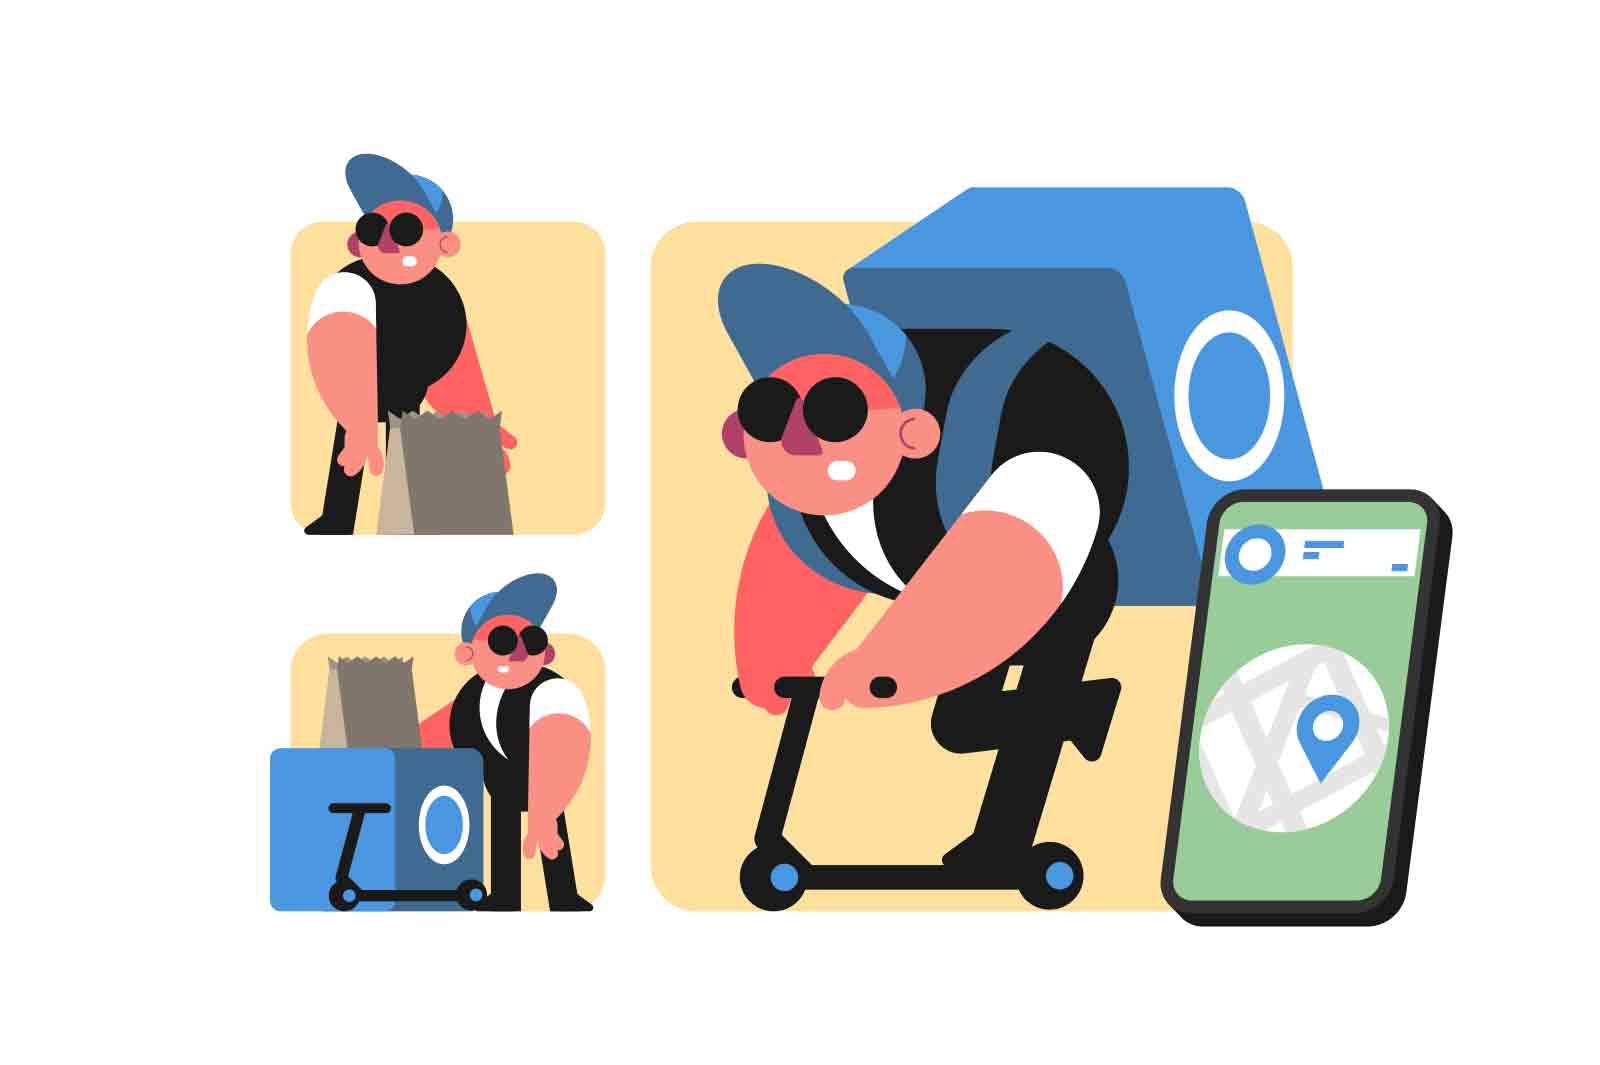 Delivery Man with Package on Scooter, vector illustration. A courier wearing a red cap and sunglasses delivers a parcel on a blue scooter